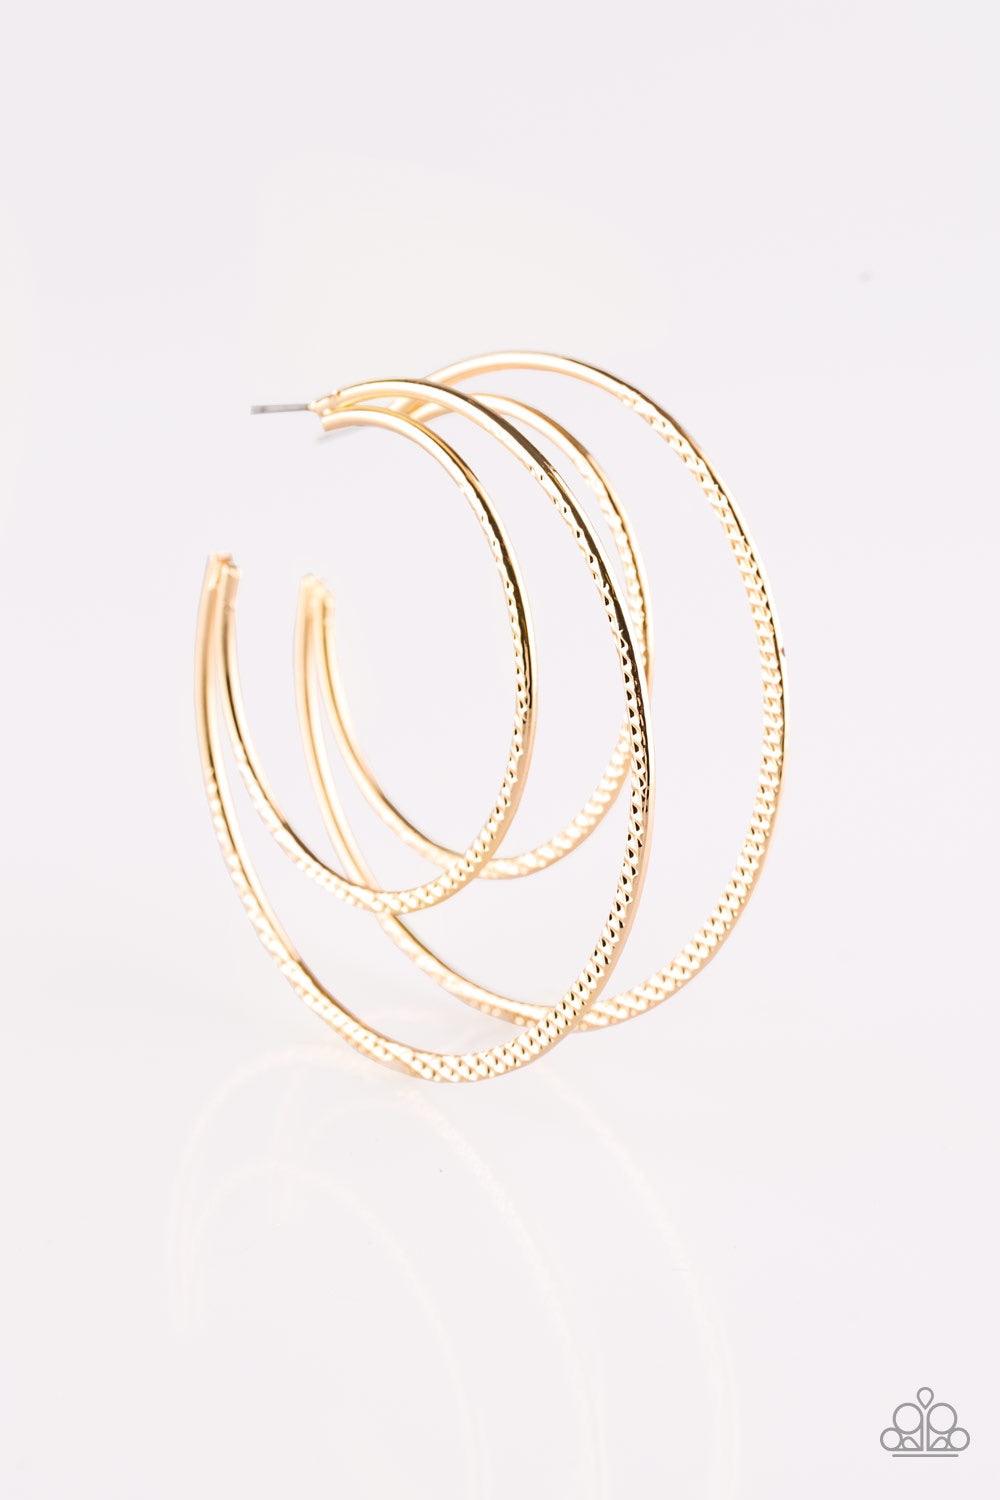 Paparazzi Accessories Drop It Like It’s HAUTE - Gold Featuring diamond-cut textures, two glistening gold bars curl into a bold hoop for a flawless finish. Earring attaches to a standard post fitting. Hoop measures 2 3/4” in diameter. Jewelry